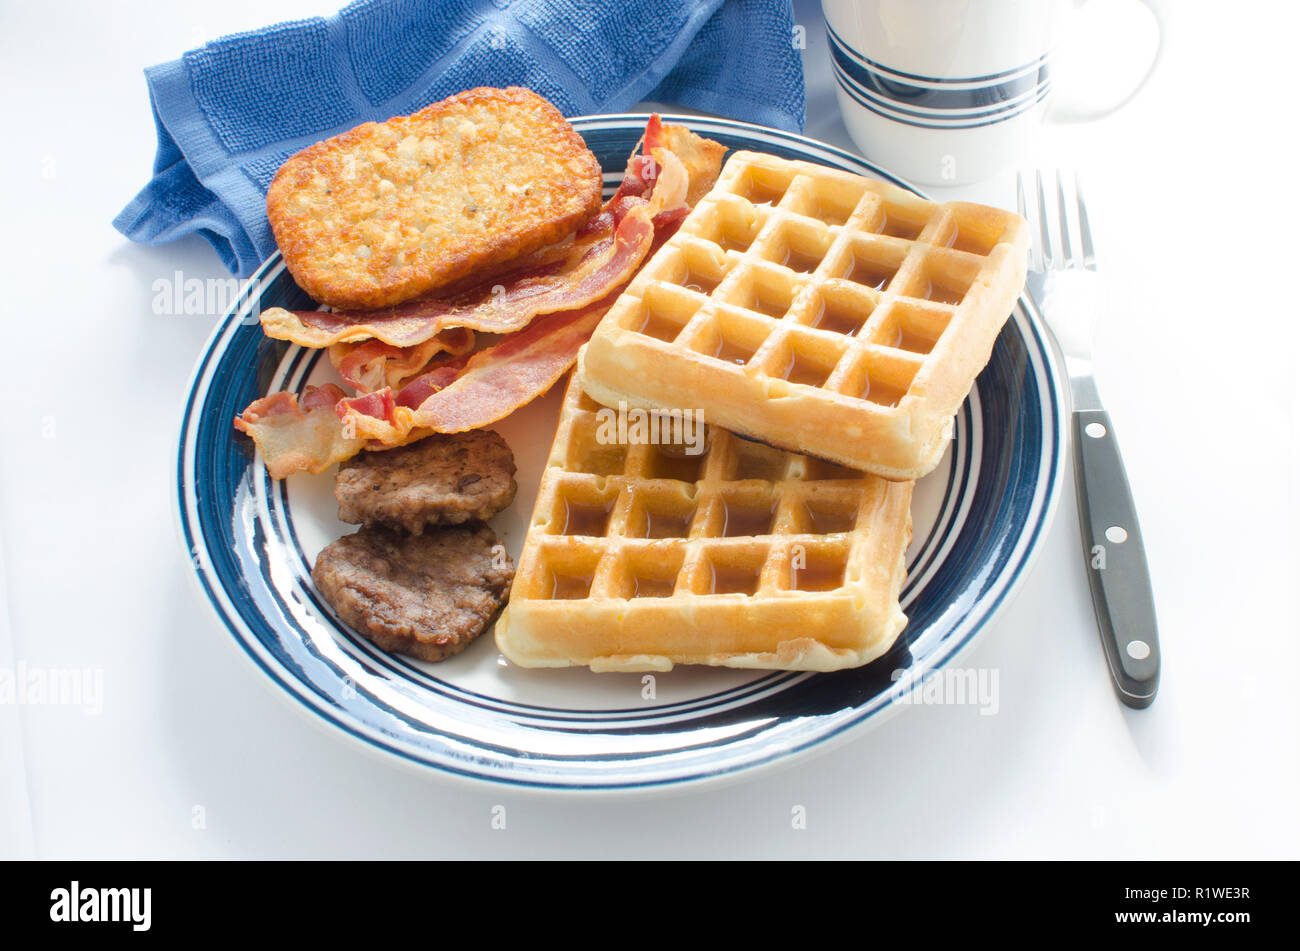 Plate of waffles with maple syrup, bacon strips, sausage patties and a hash brown potato Stock Photo